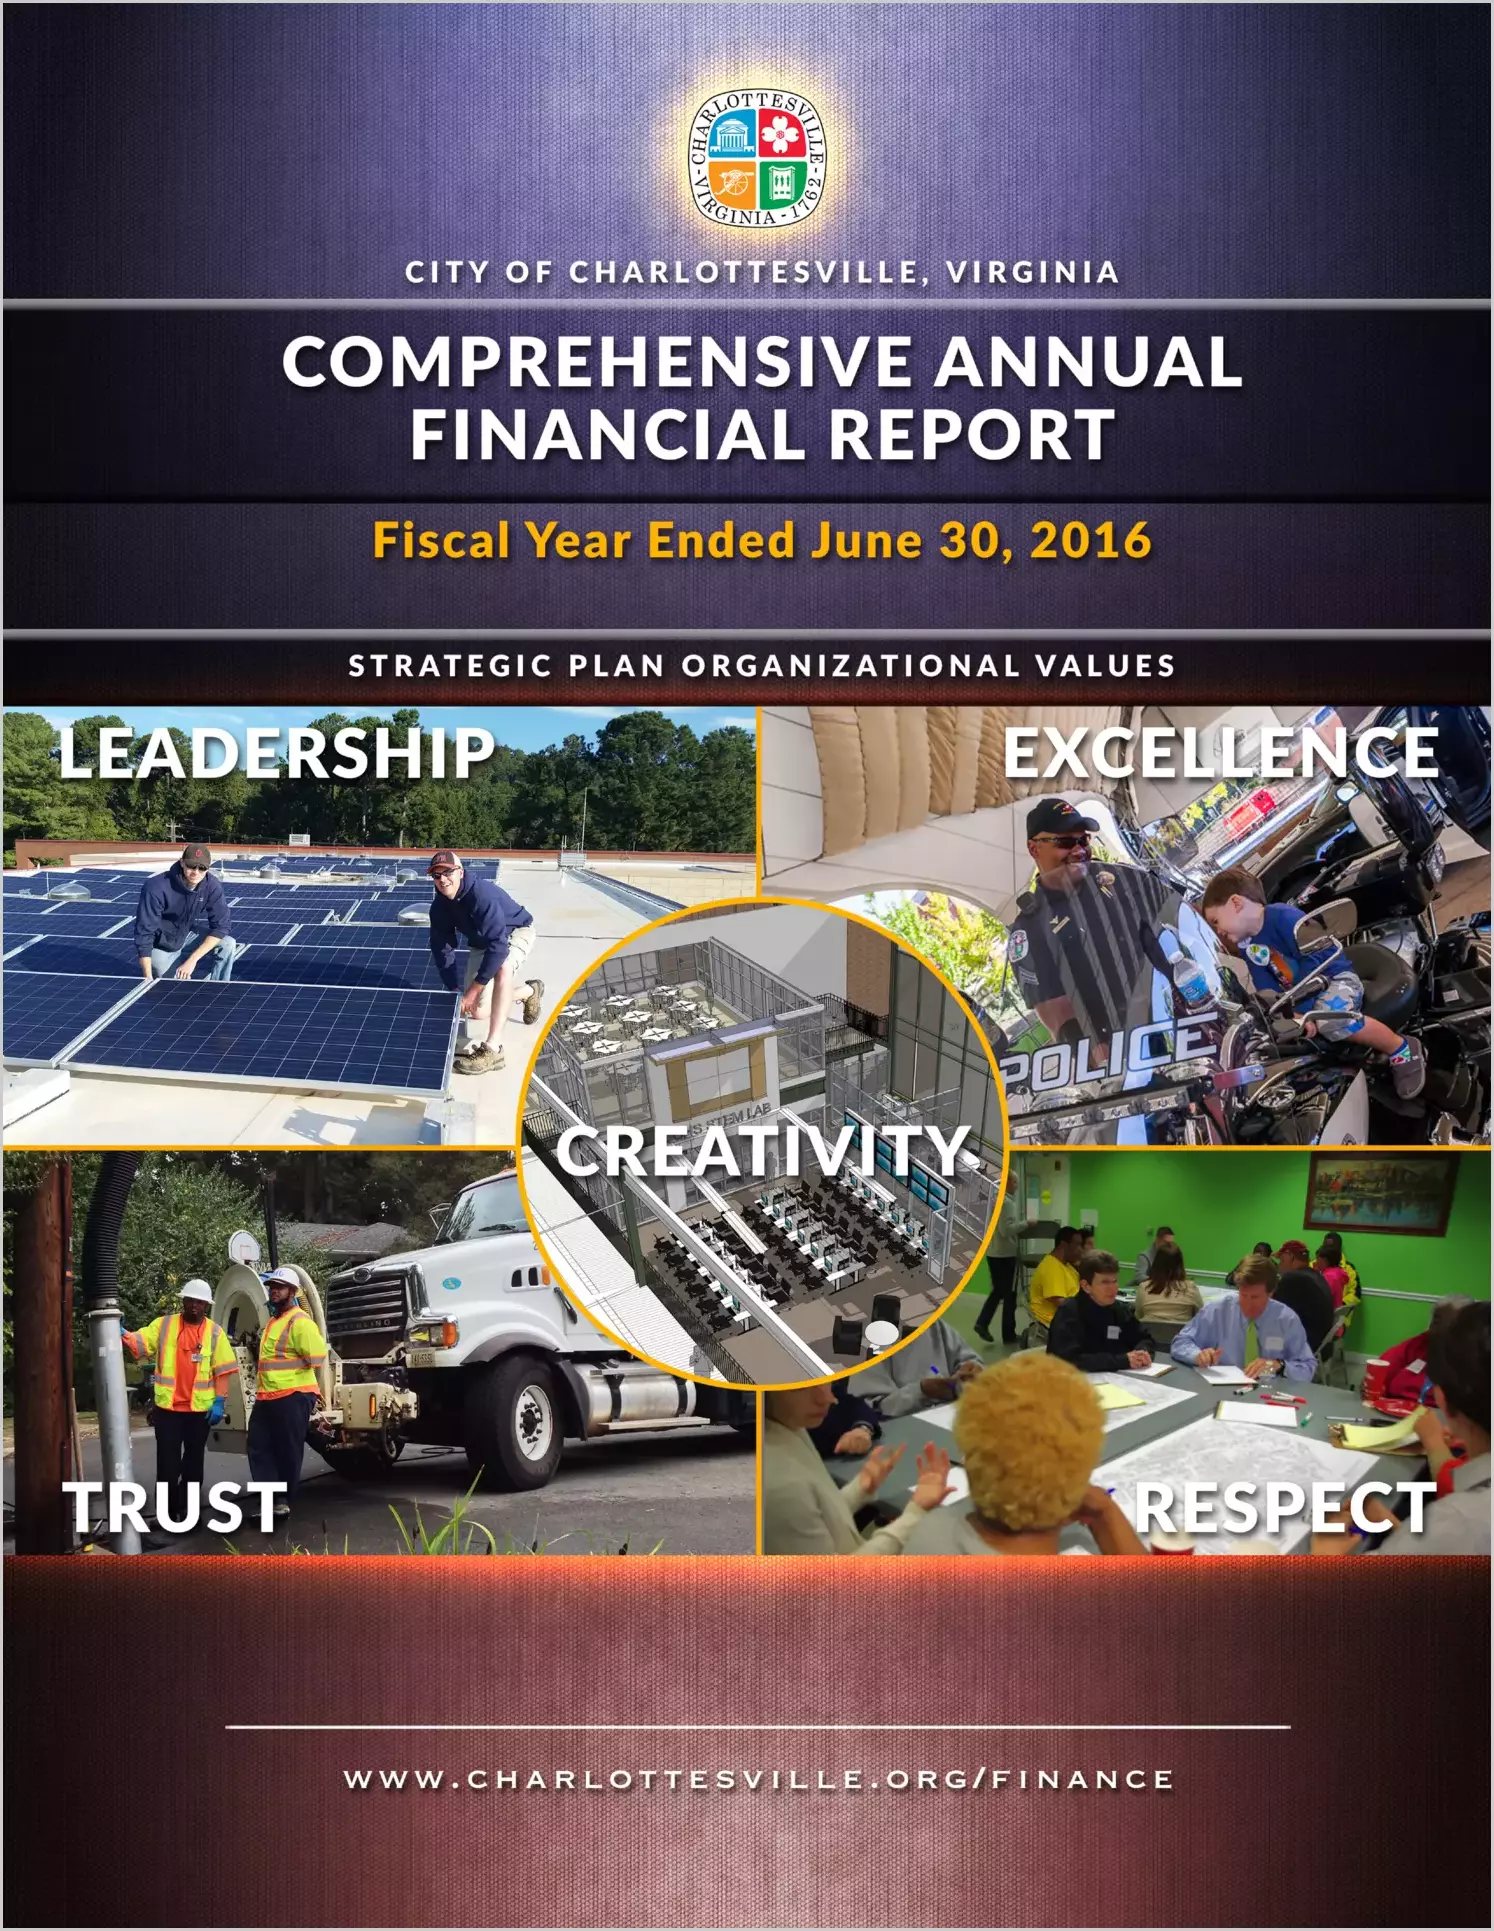 2016 Annual Financial Report for City of Charlottesville